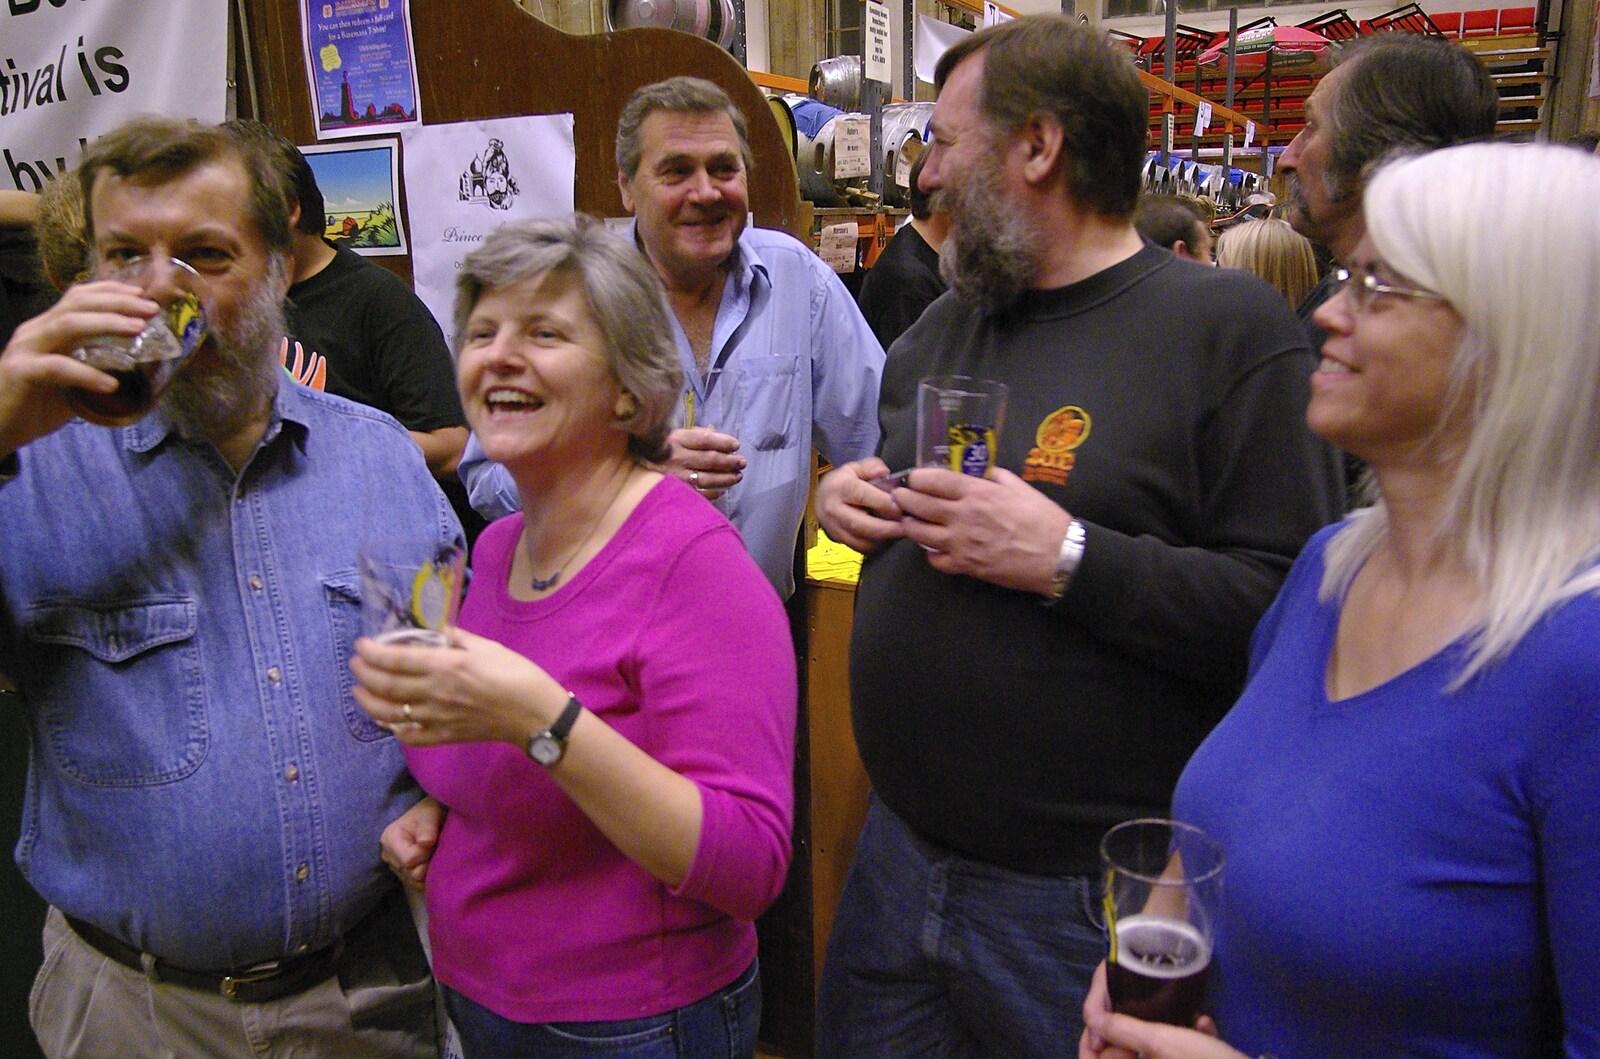 The 30th Norwich Beer Festival, St. Andrew's Hall, Norfolk - 24th October 2007: Benny, Gloria, Alan, Gerry and Carol